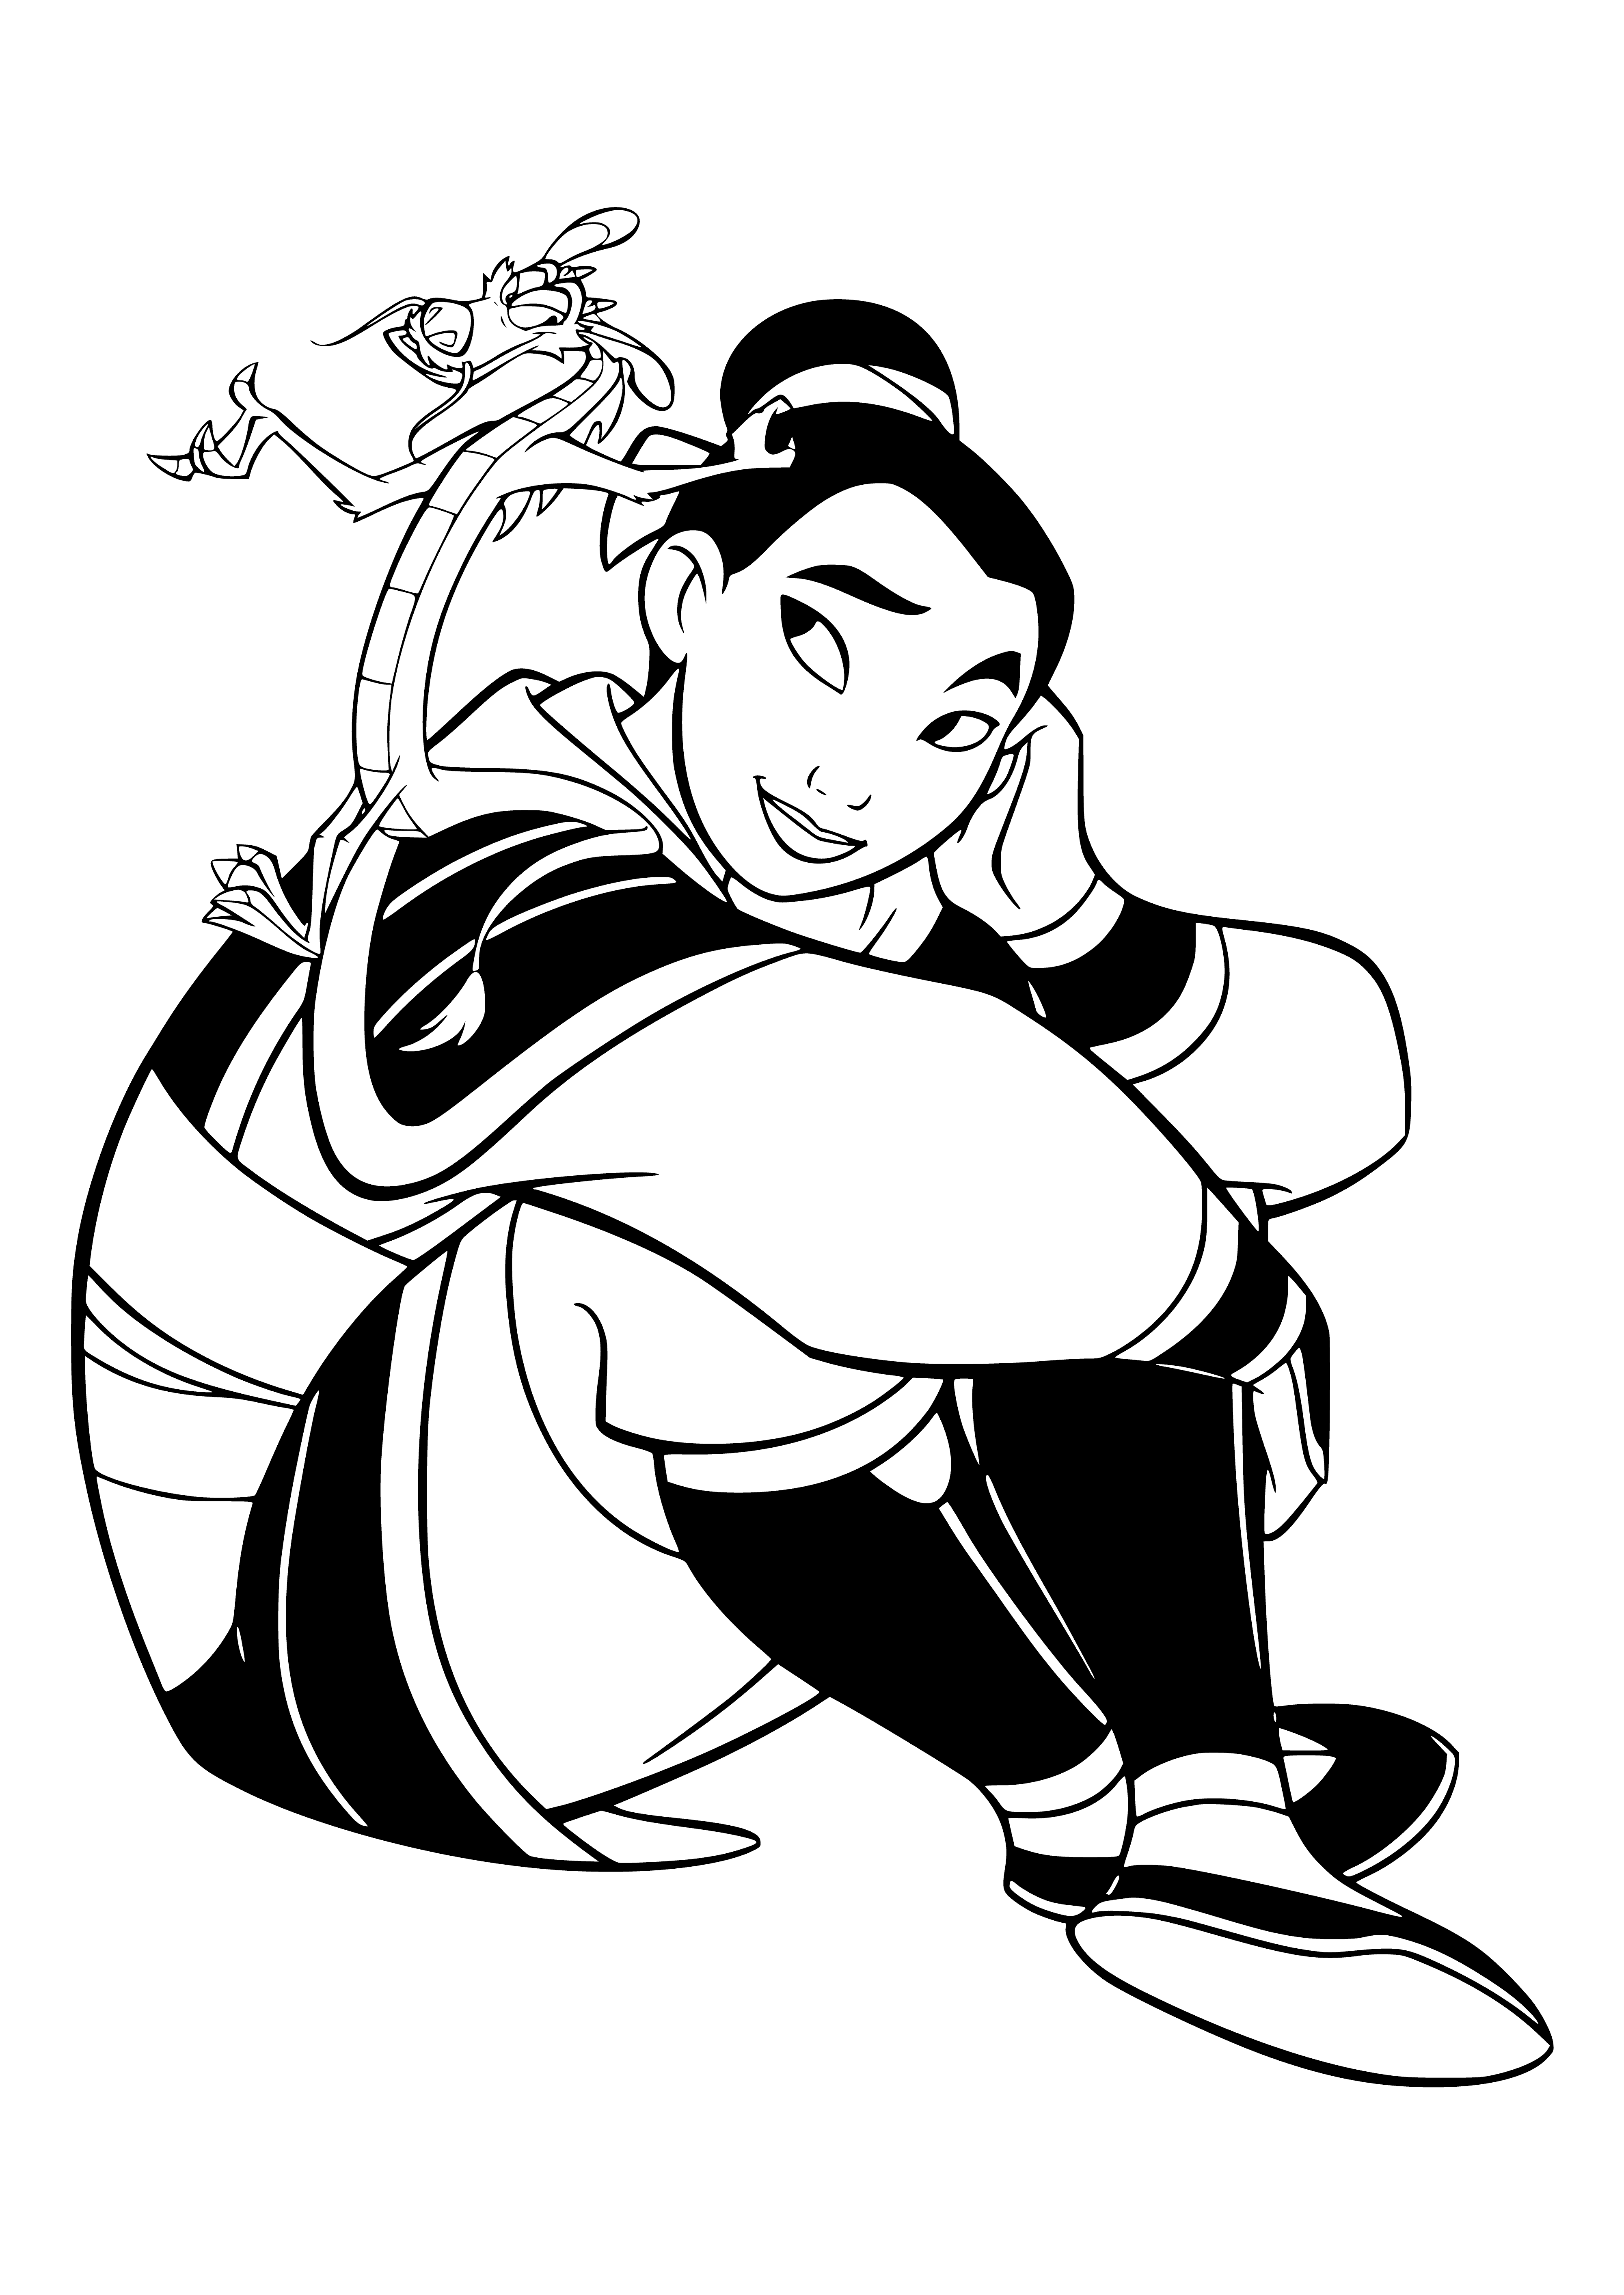 coloring page: Mulan and Mushu stand confidently together; she looks serious, while he's proud & happy. Both have crossed arms.